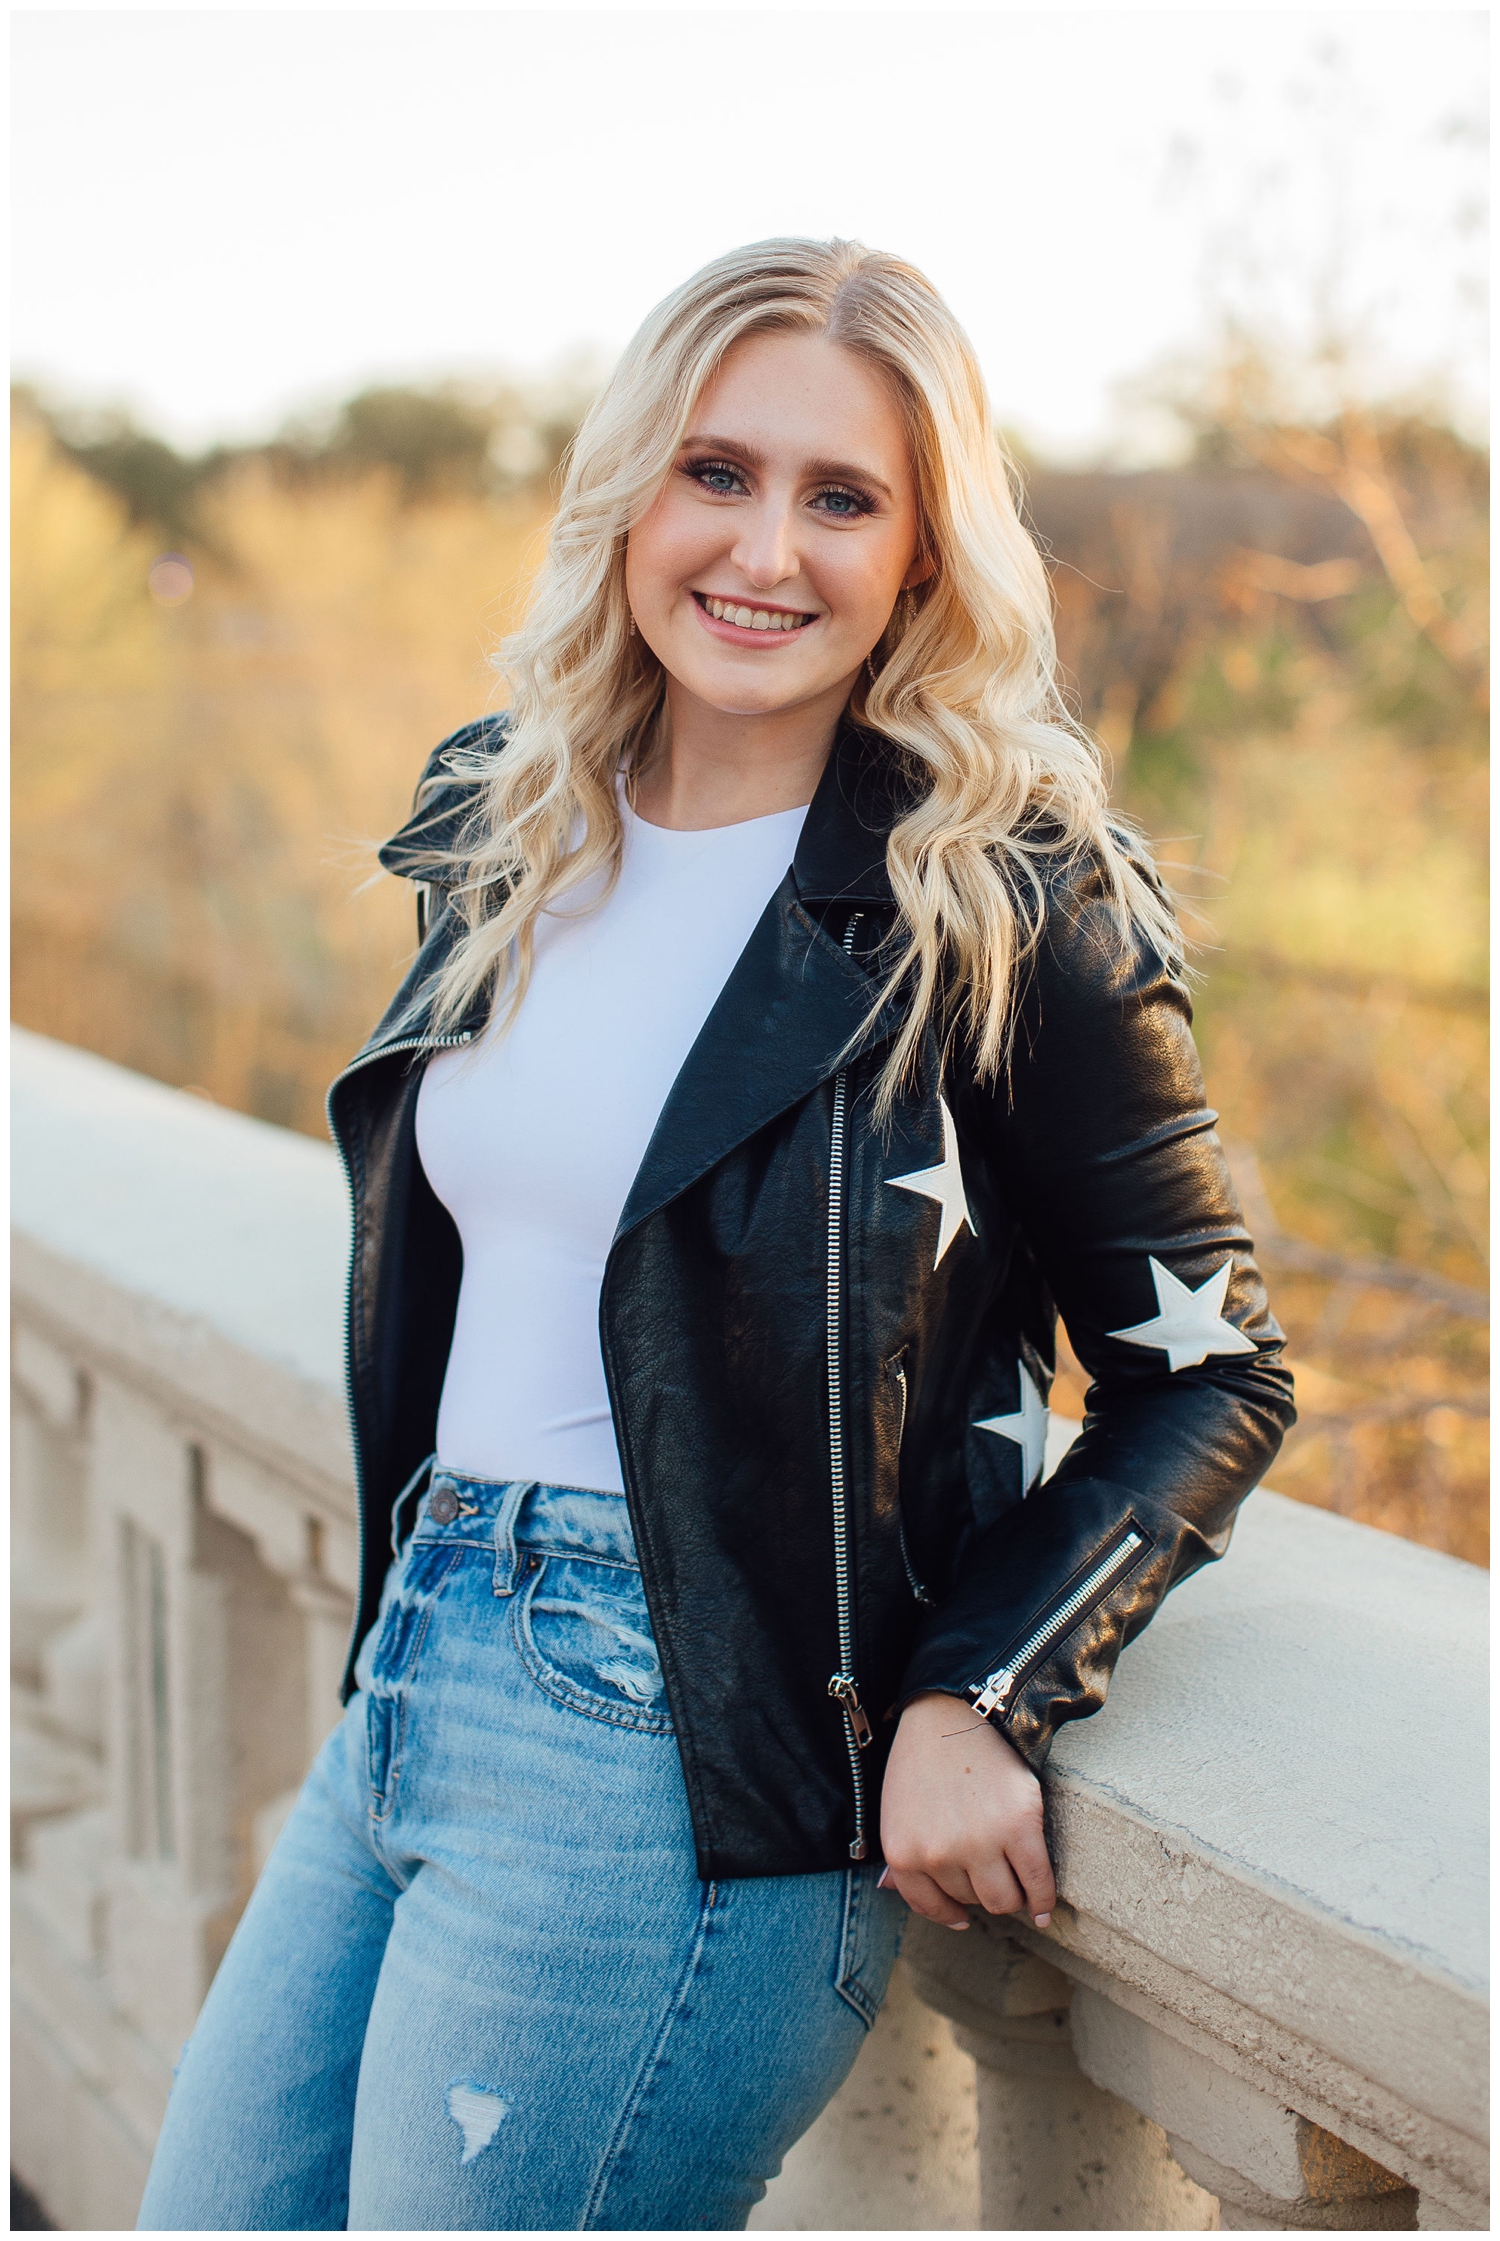 girl wearing black jacket with stars and jeans standing on Sabine Street Bridge for senior pictures Houston Texas